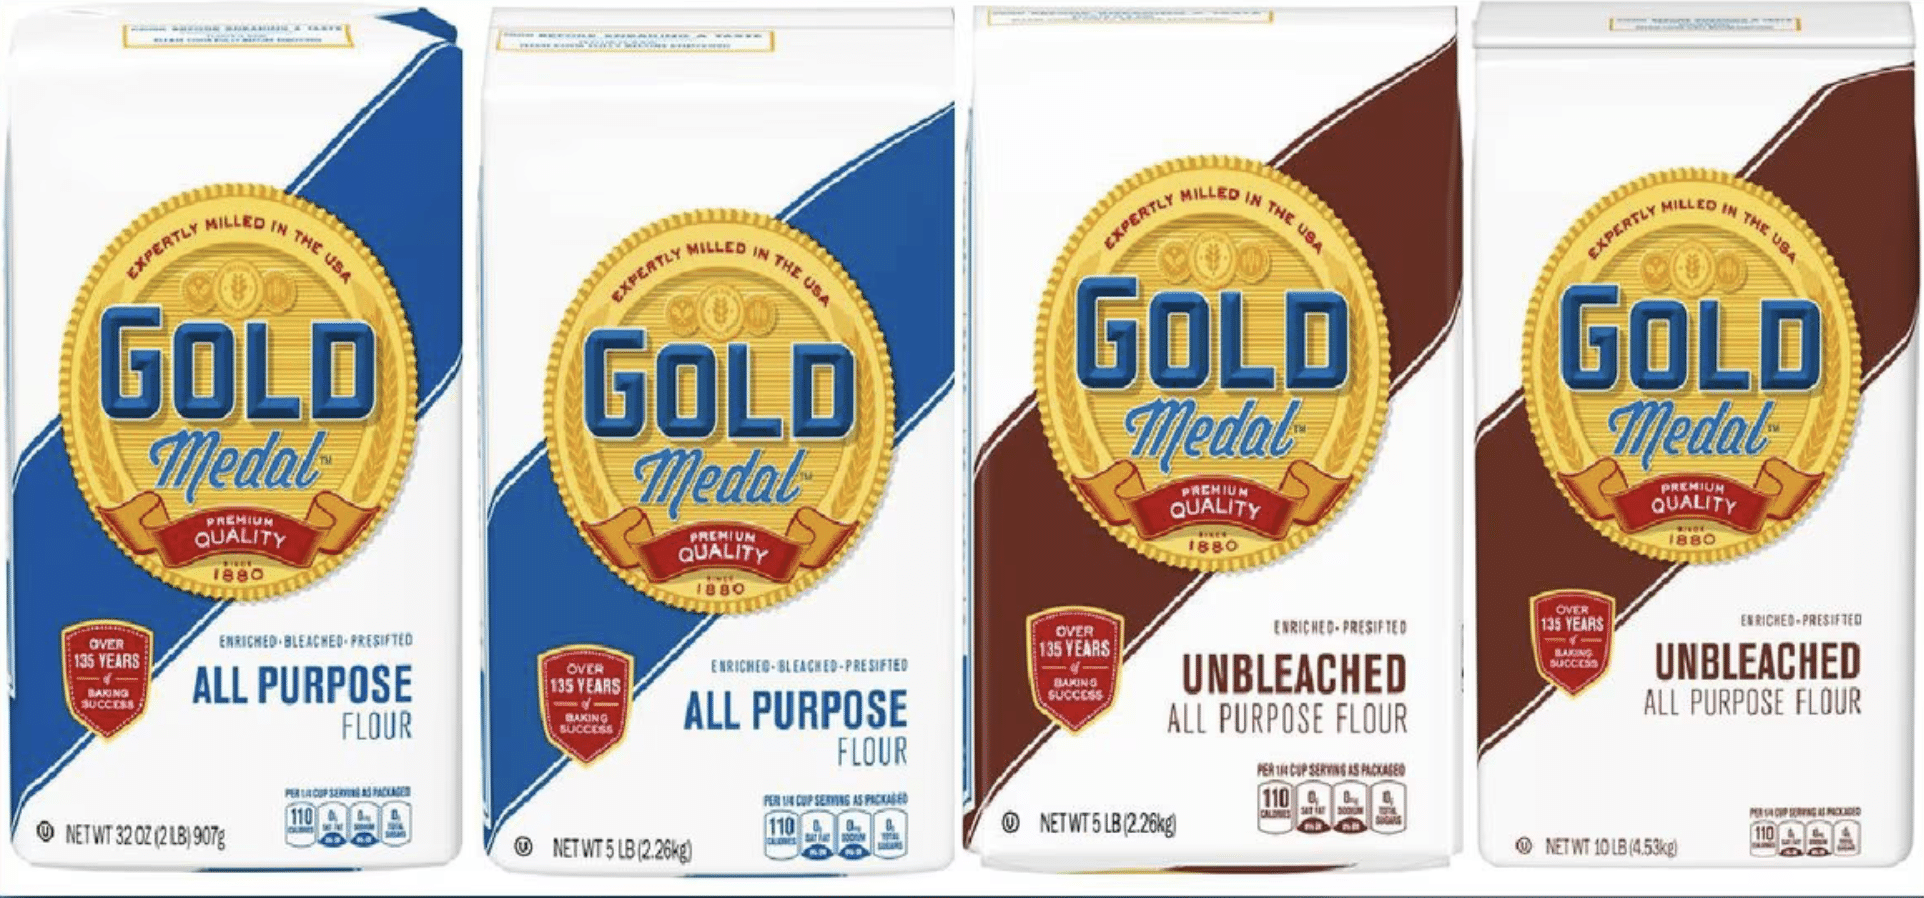 Gold Medal Flour Recalled After Salmonella Outbreak 